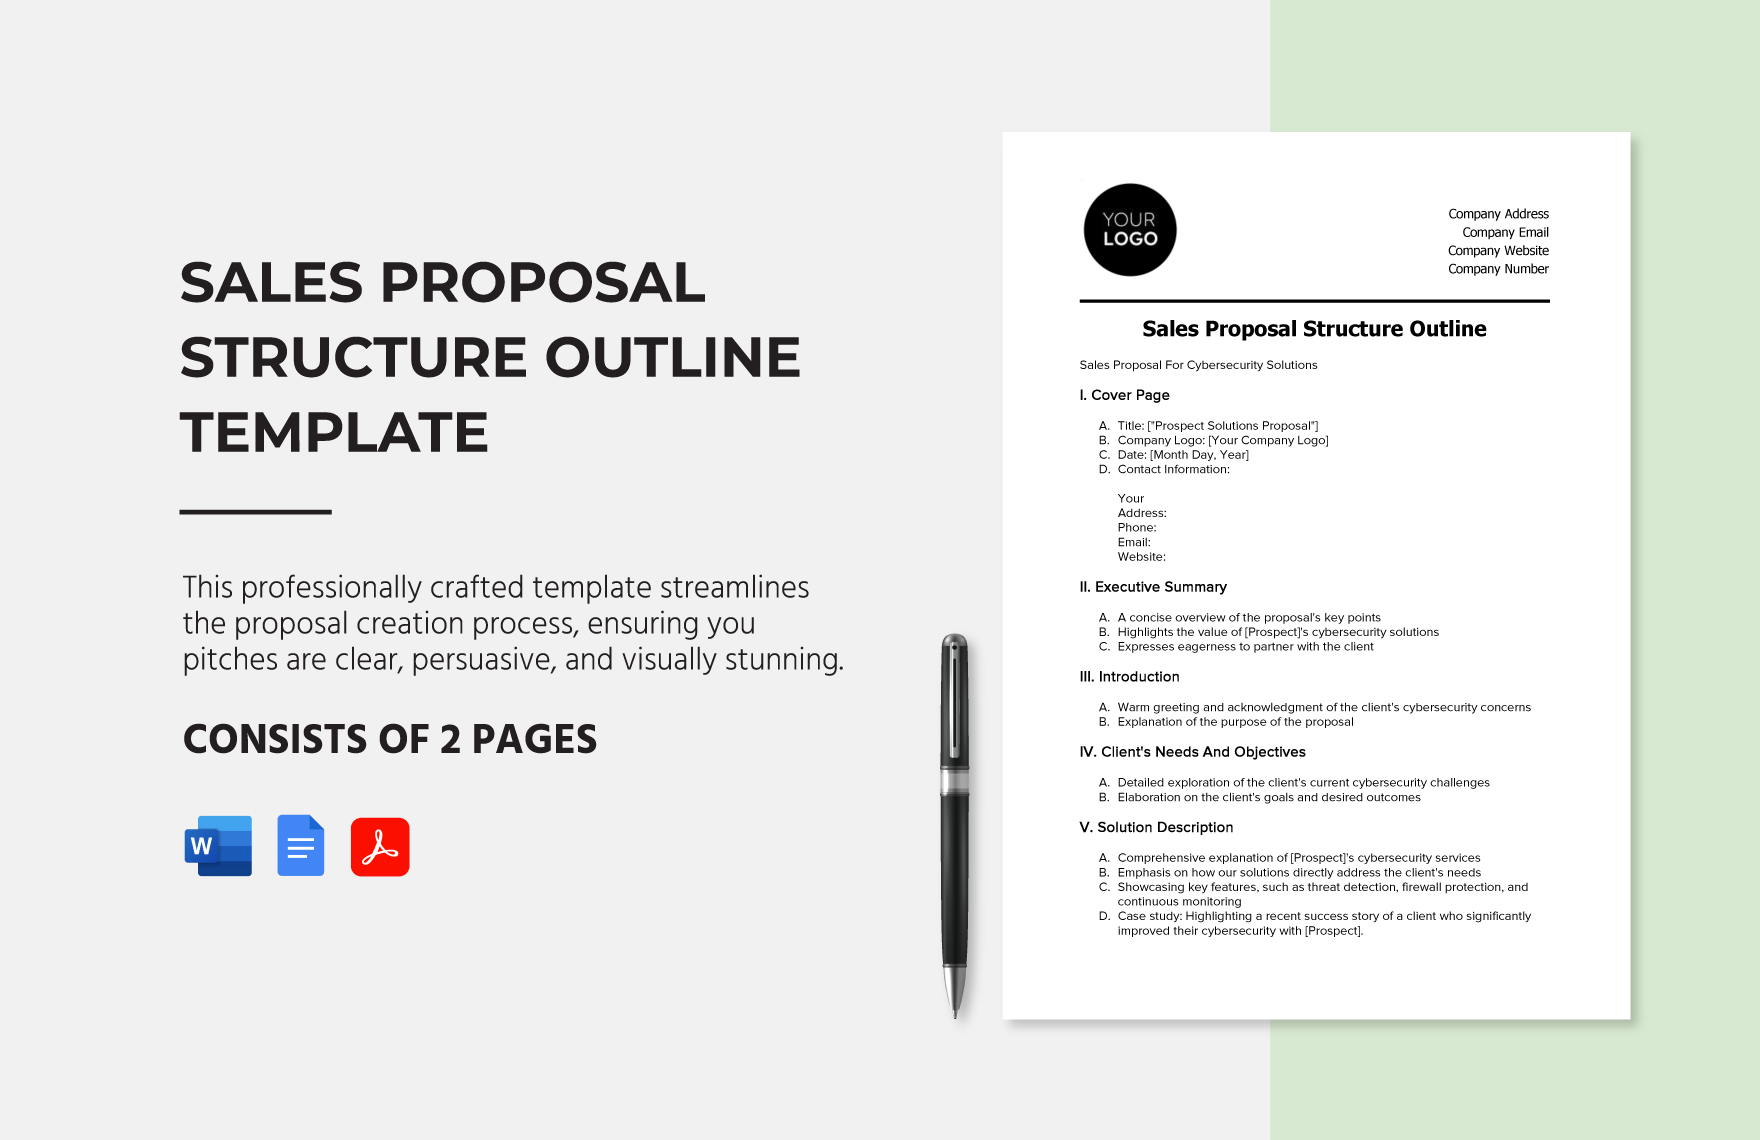 Sales Proposal Structure Outline Template in Word, Google Docs, PDF